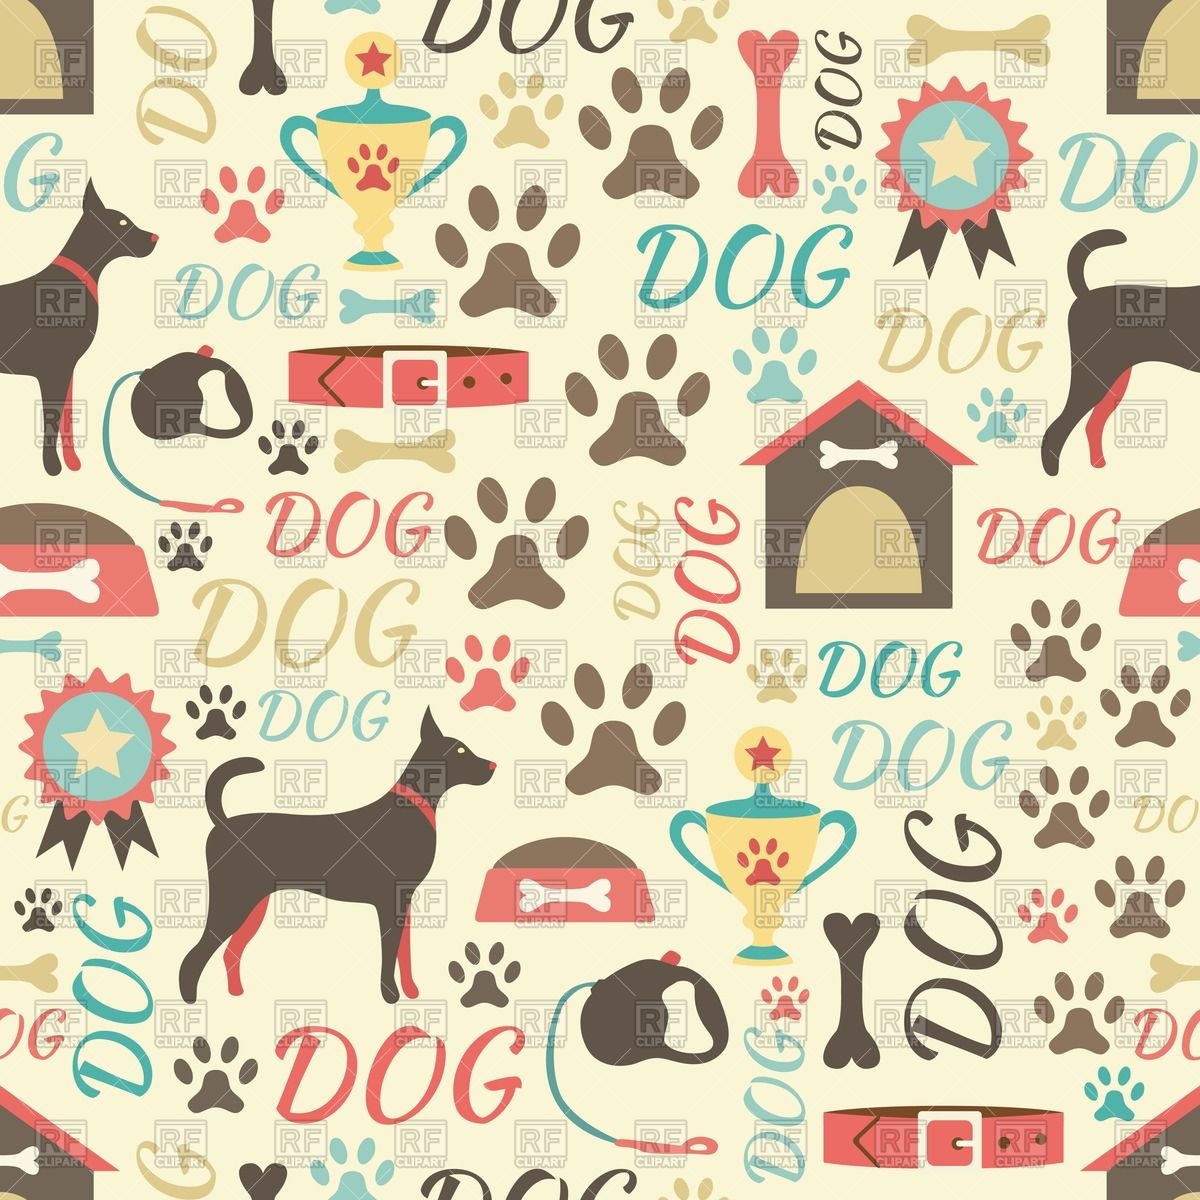 Seamless Retro Style Background With Dog Doghouse Collars Paw